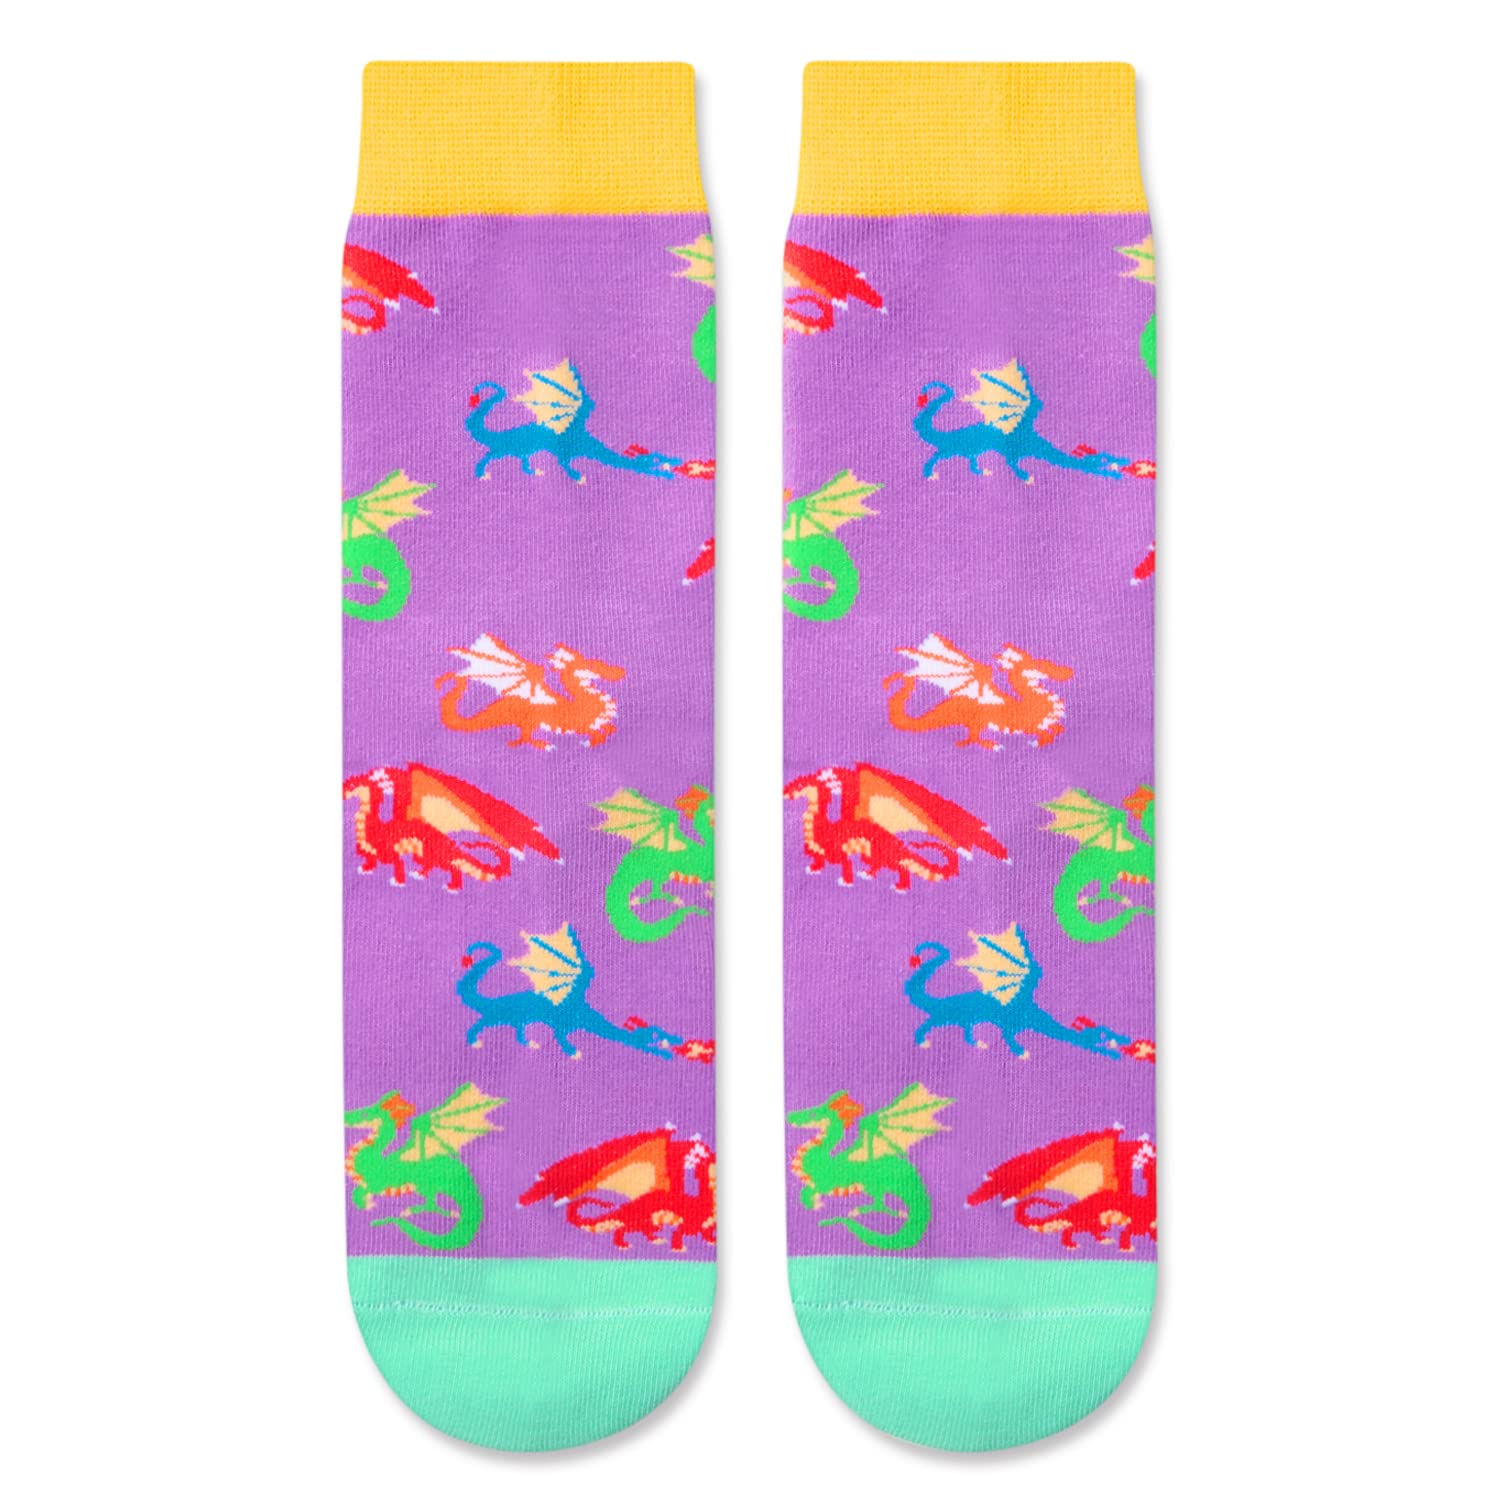 HAPPYPOP Crazy Dragon Gifts for Girls Kids, Silly Kids Girls Socks Dragon Girl Socks Dragon Stuff, Kids Socks for Girls 7-9 Years Old